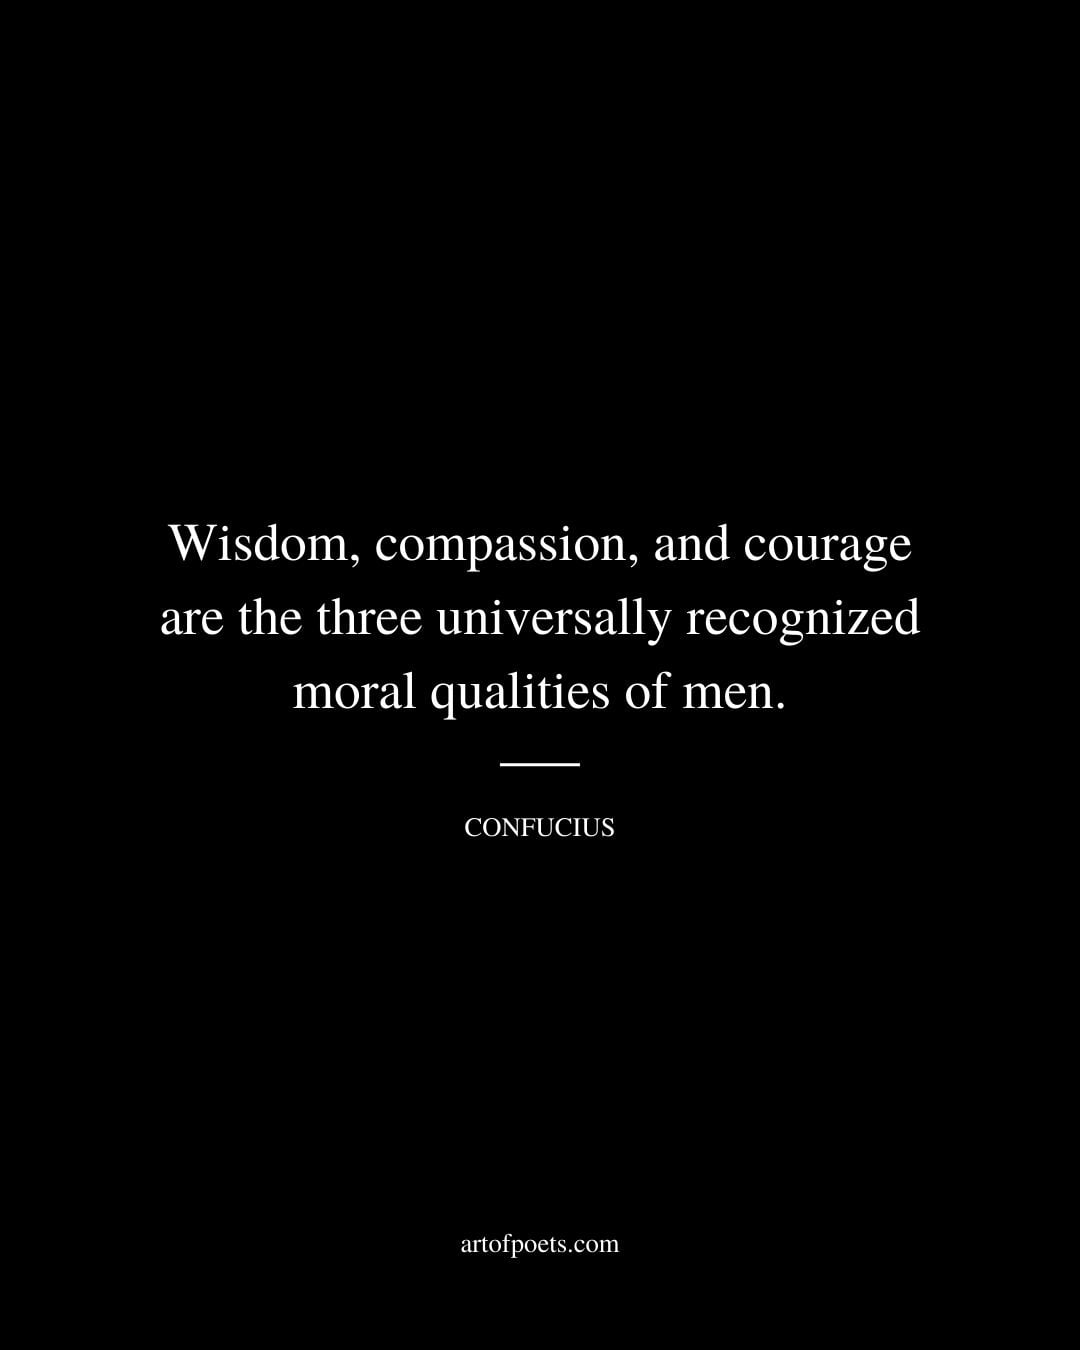 Wisdom compassion and courage are the three universally recognized moral qualities of men